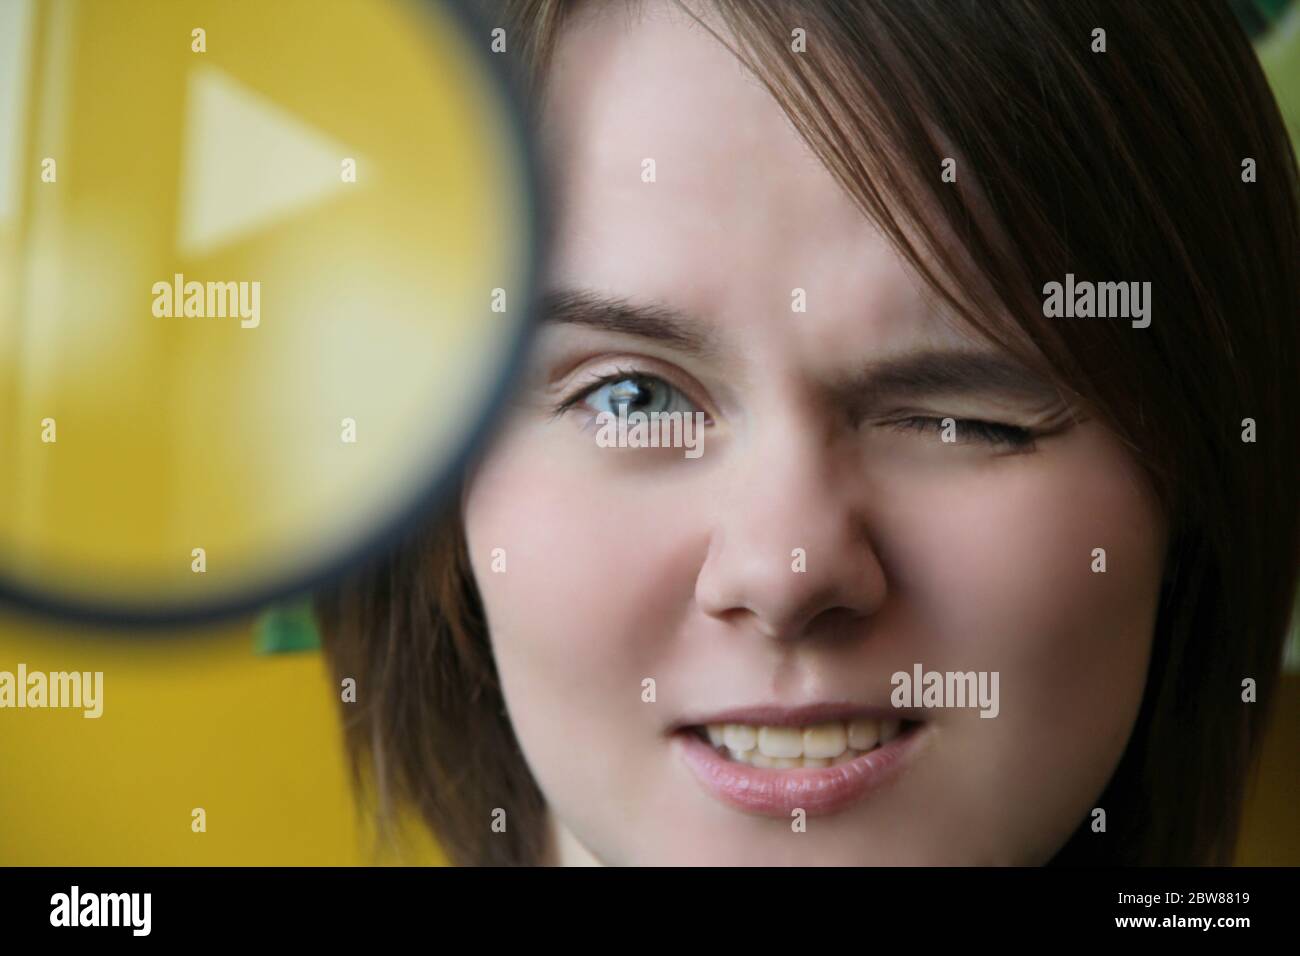 A beautiful young girl looks through a magnifying glass squinting one eye. Face close-up.  Stock Photo